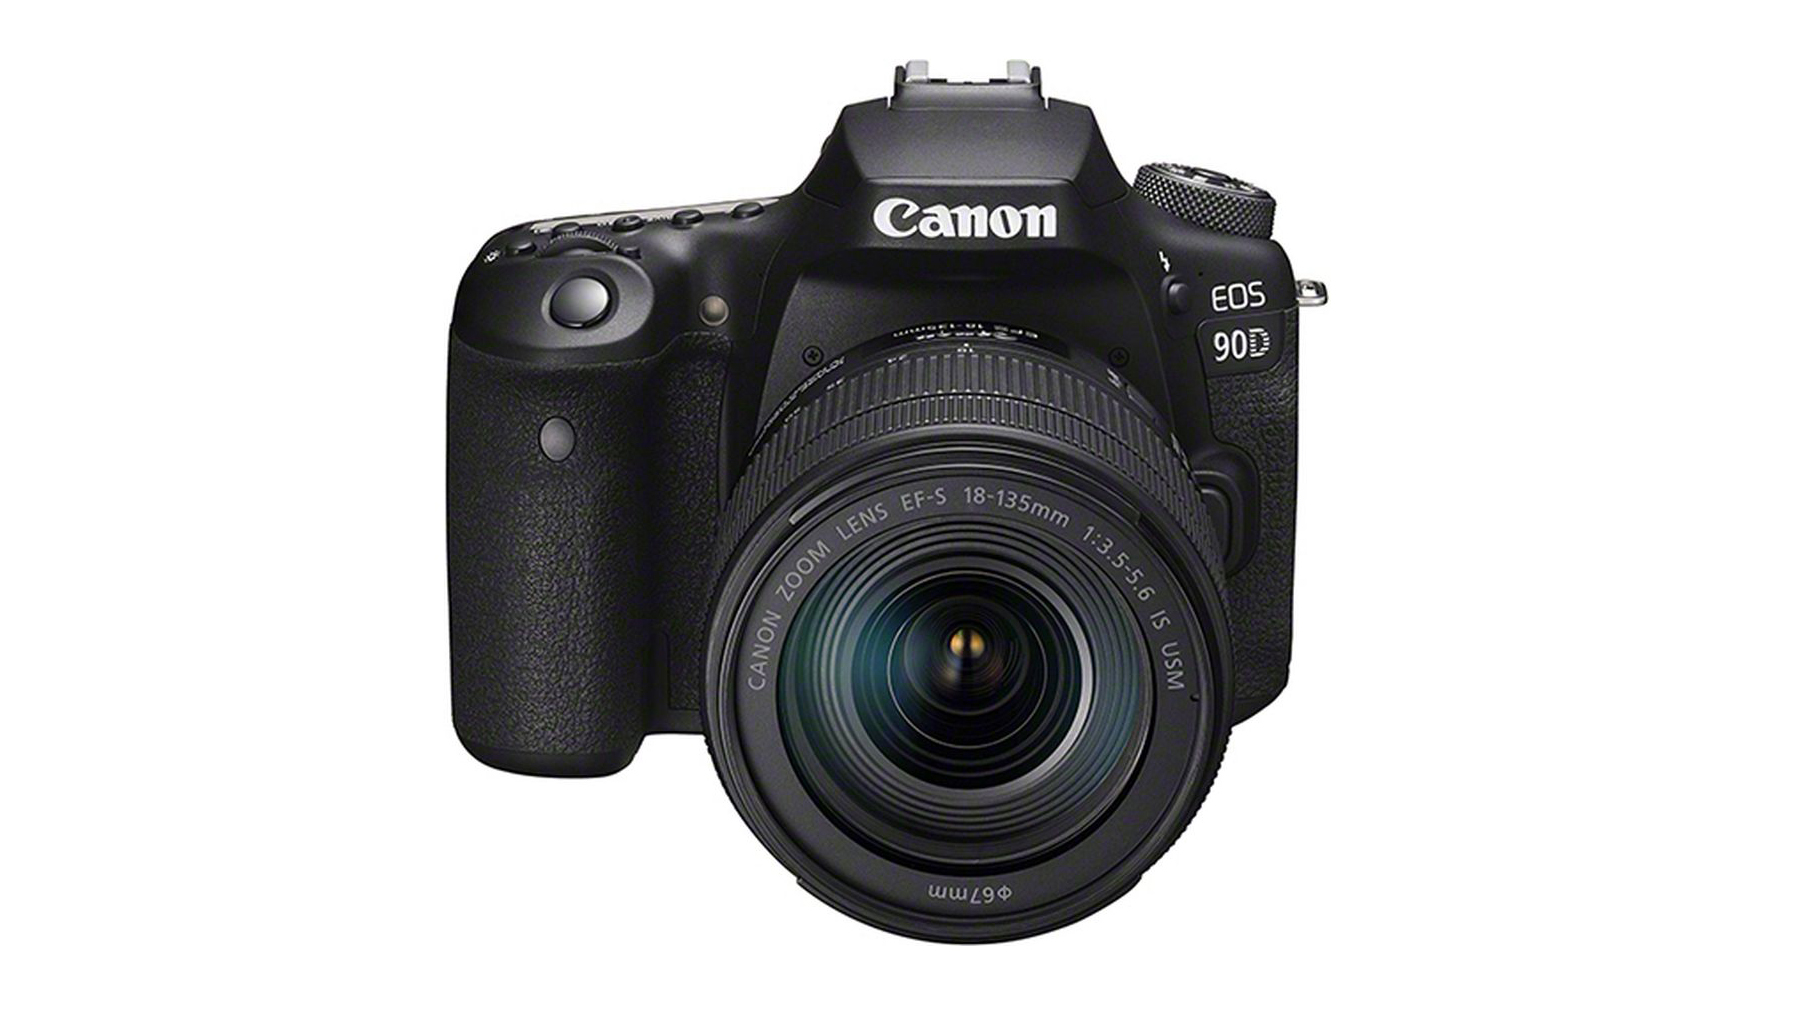 best camera for wildlife photography: Canon EOS 90D